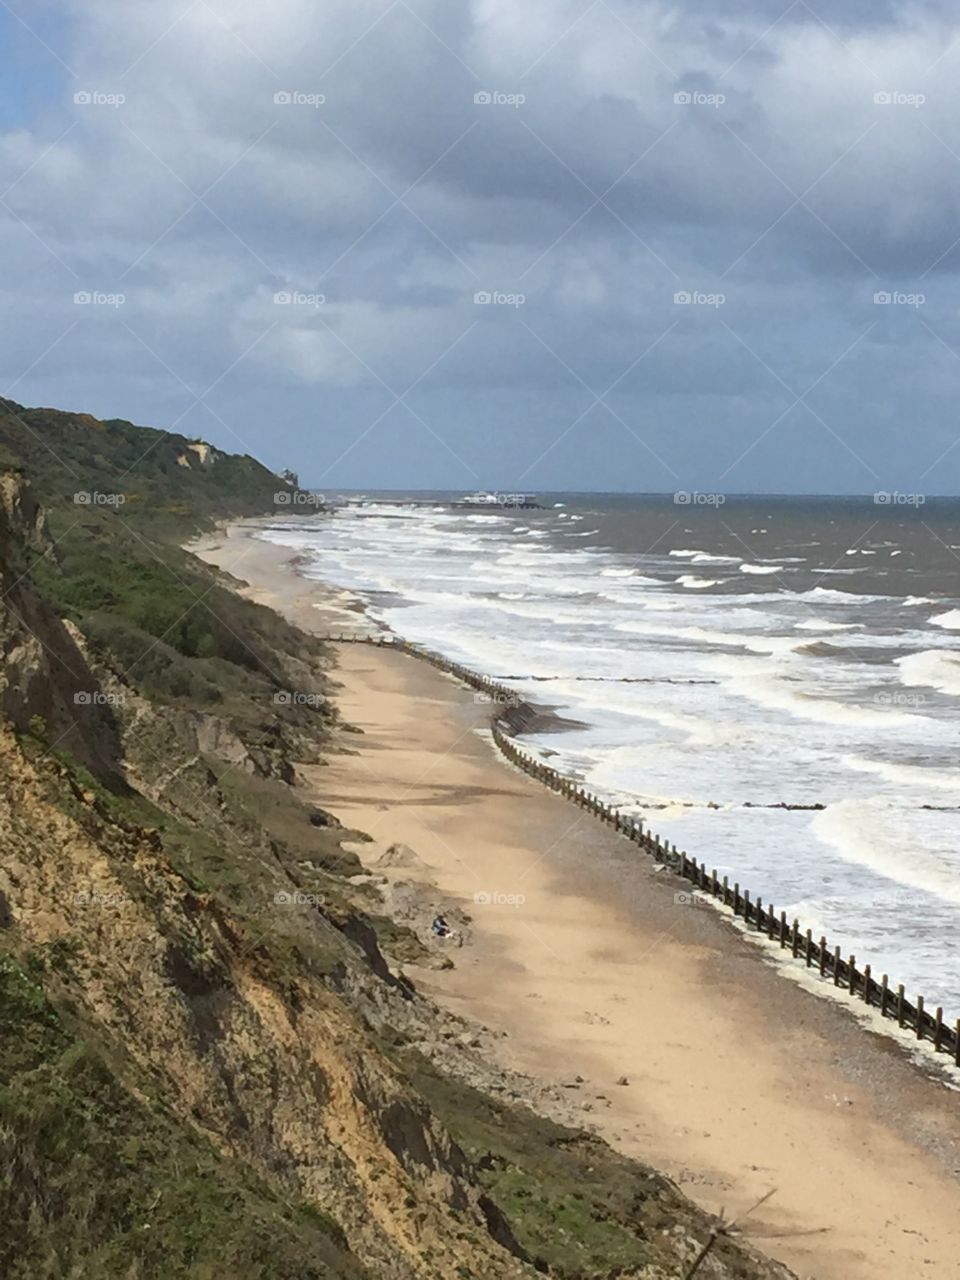 Overstrand beach from the cliffs